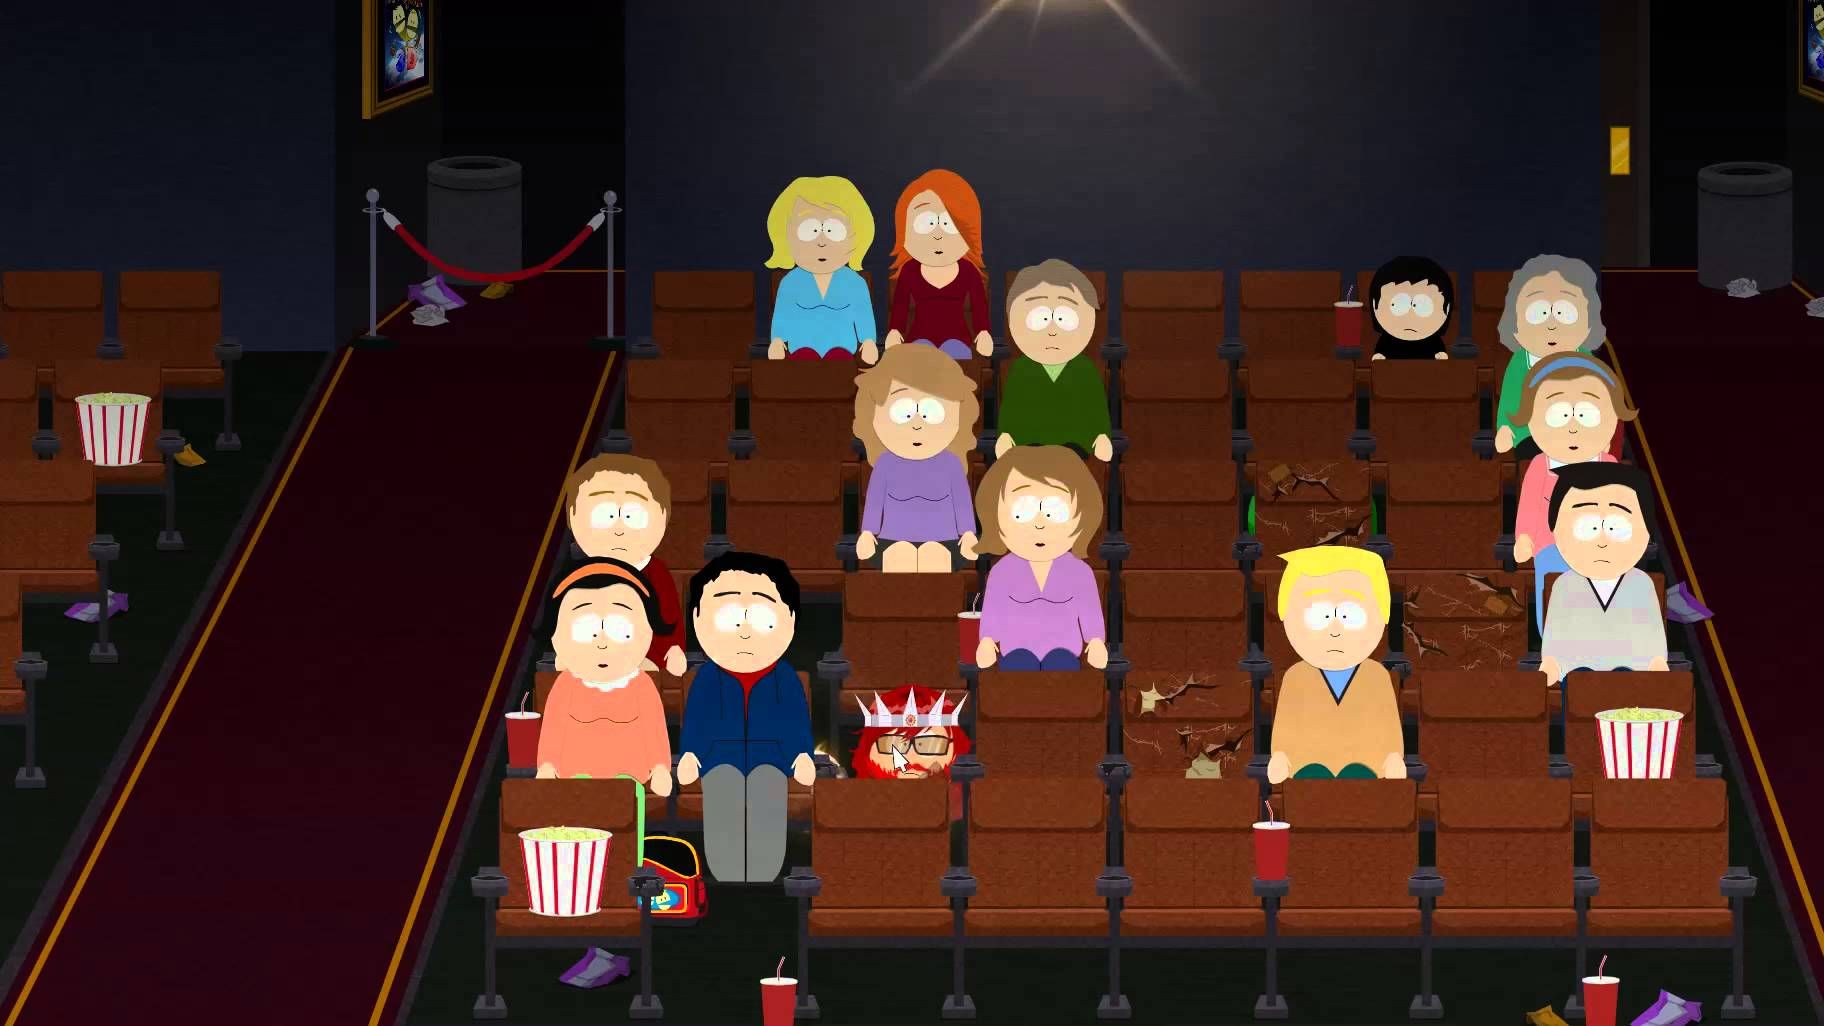 15 Most WTF Things In South Park The Stick Of Truth